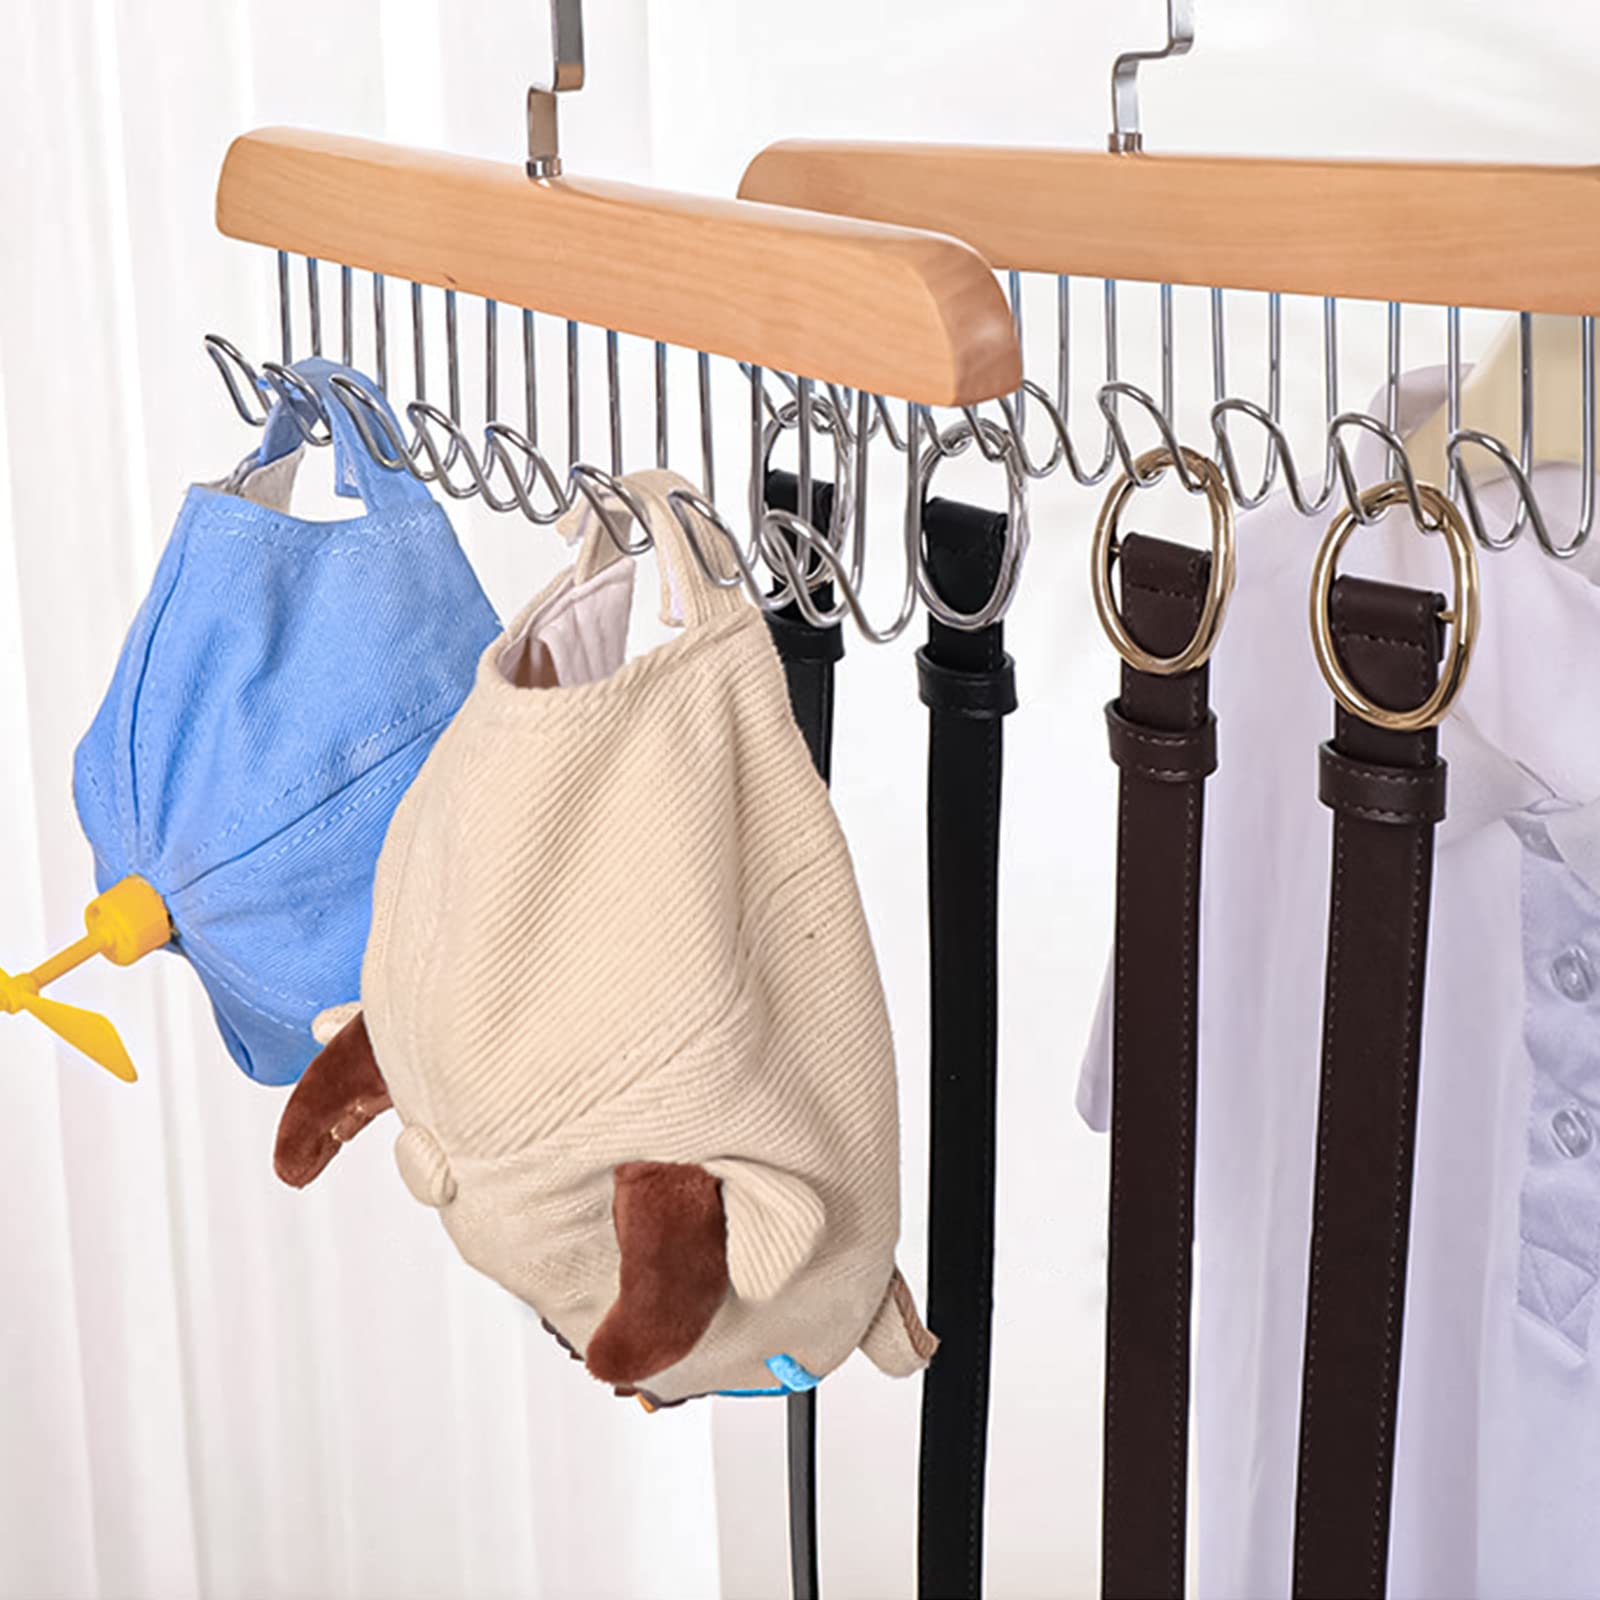  ENLOY Clothes Hanger Connector Hooks, Space Saving